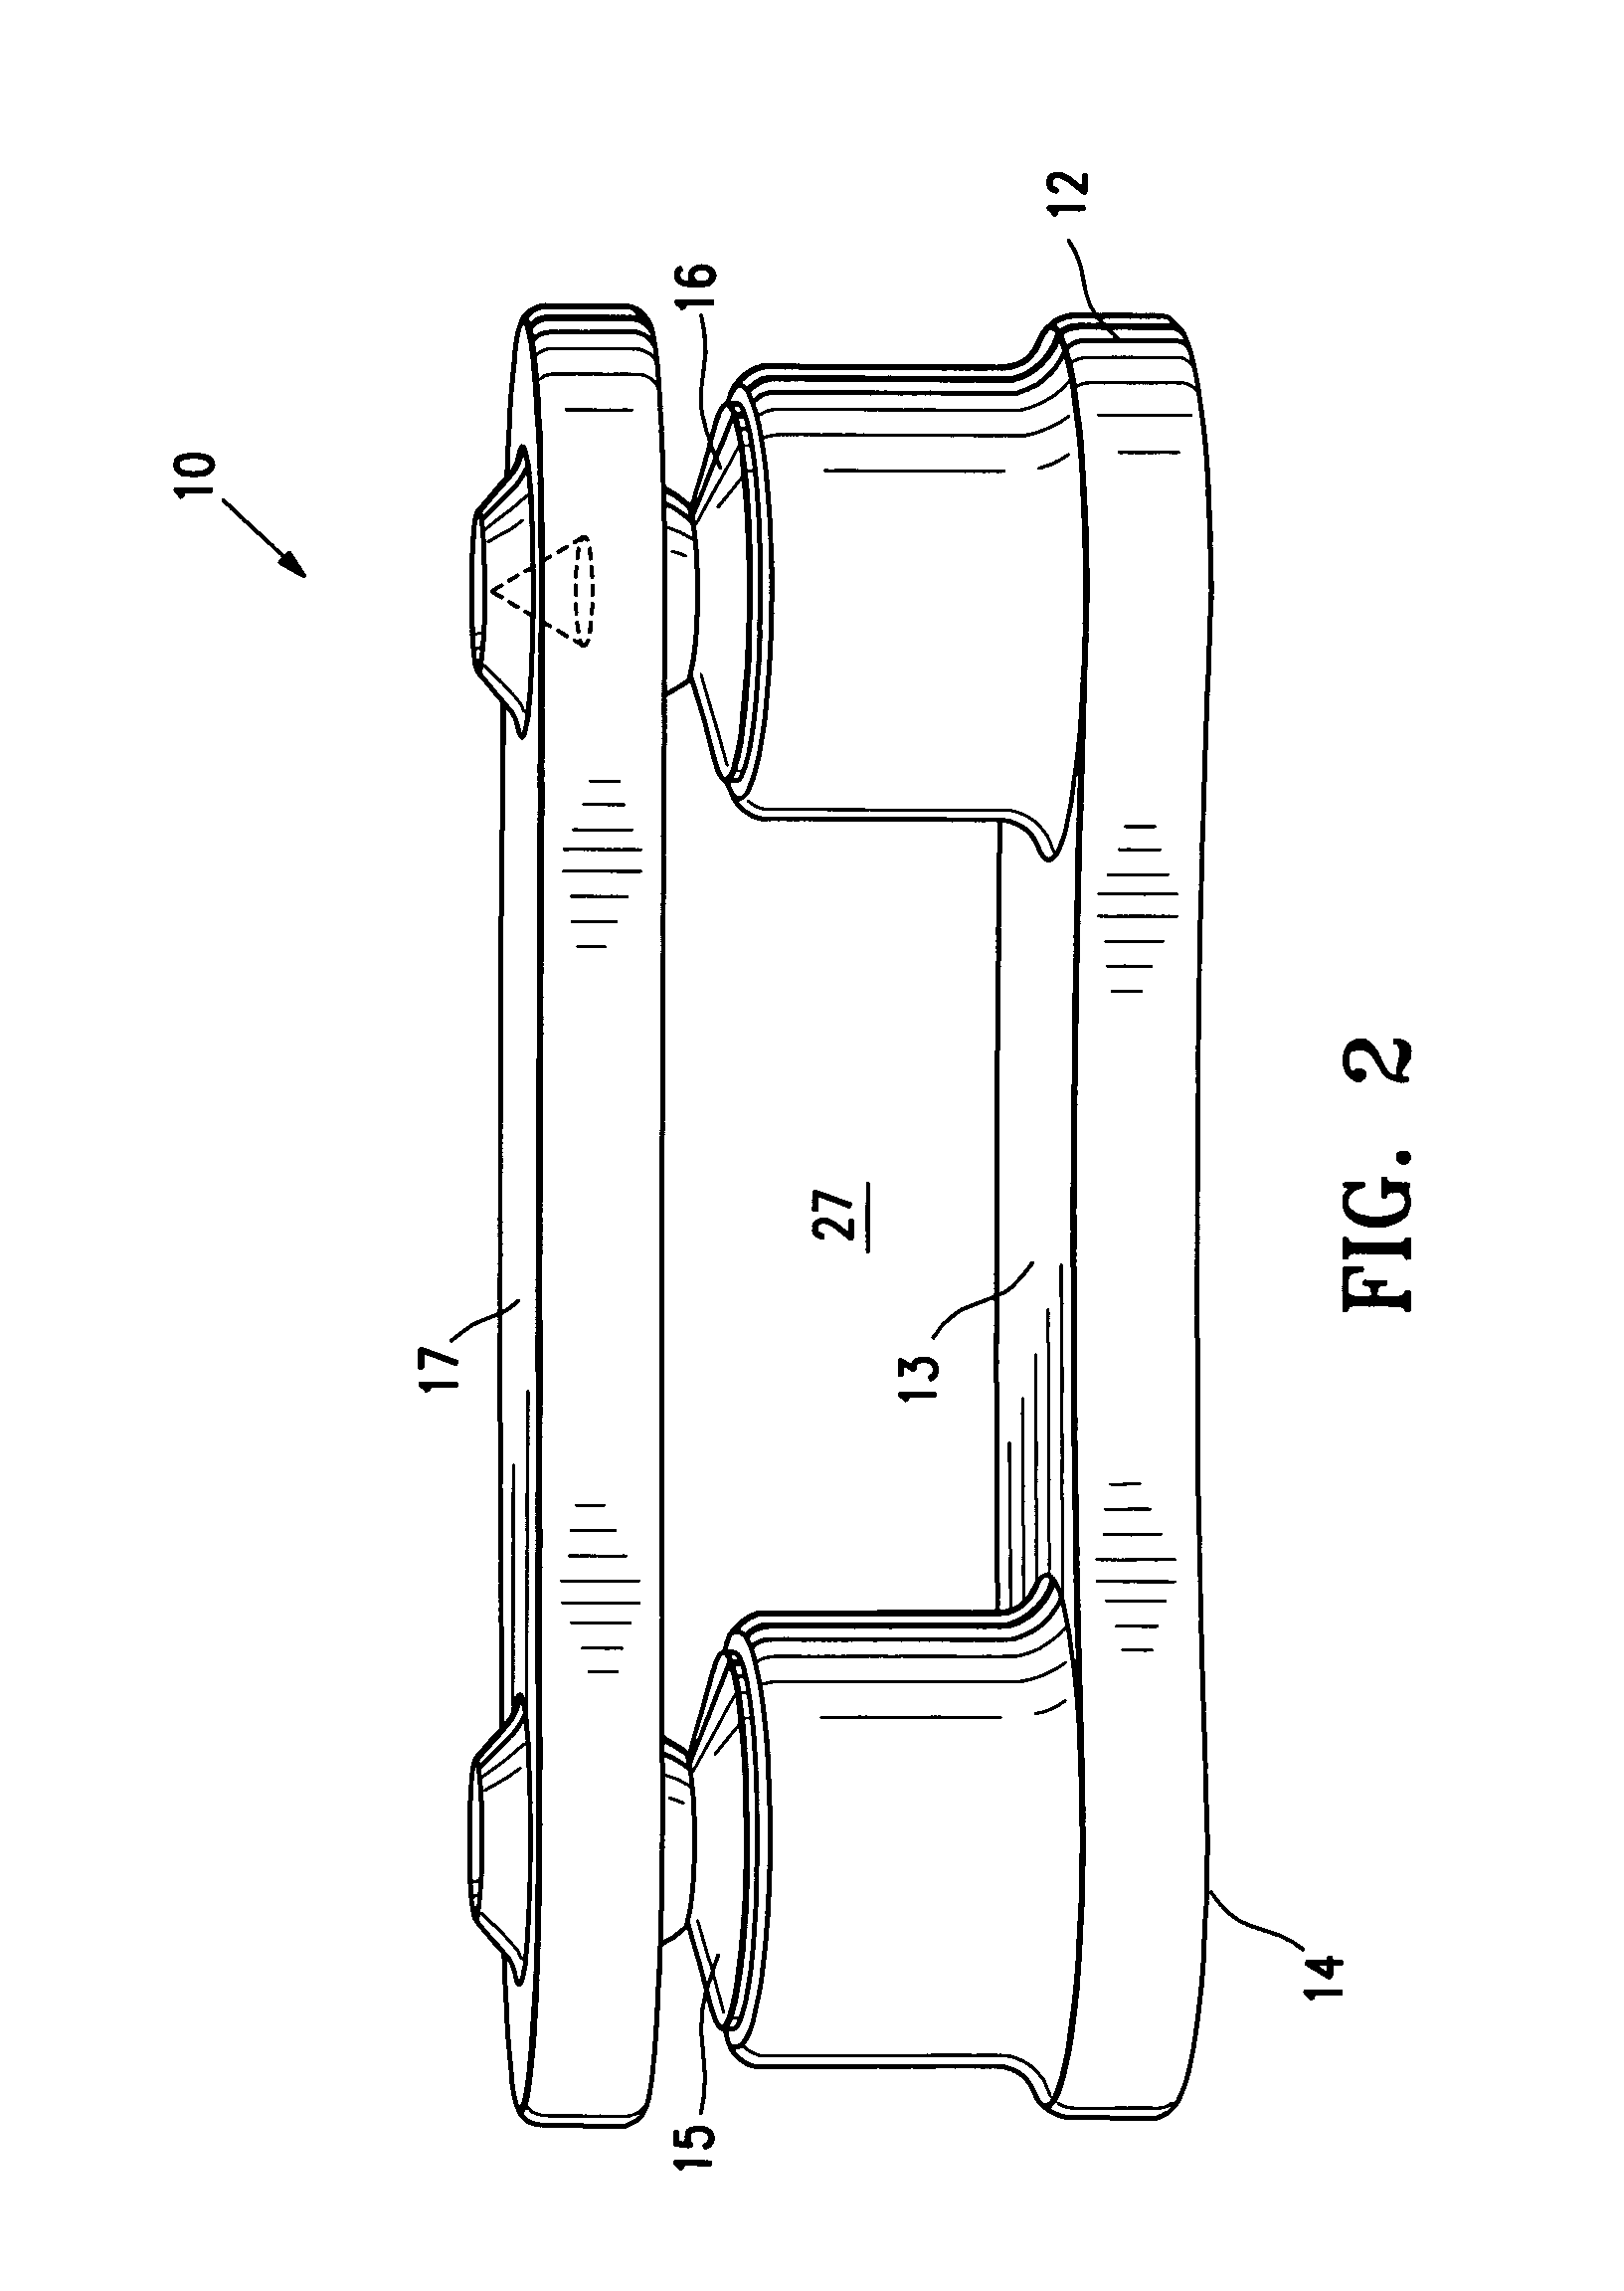 Spinal implant with expandable fixation